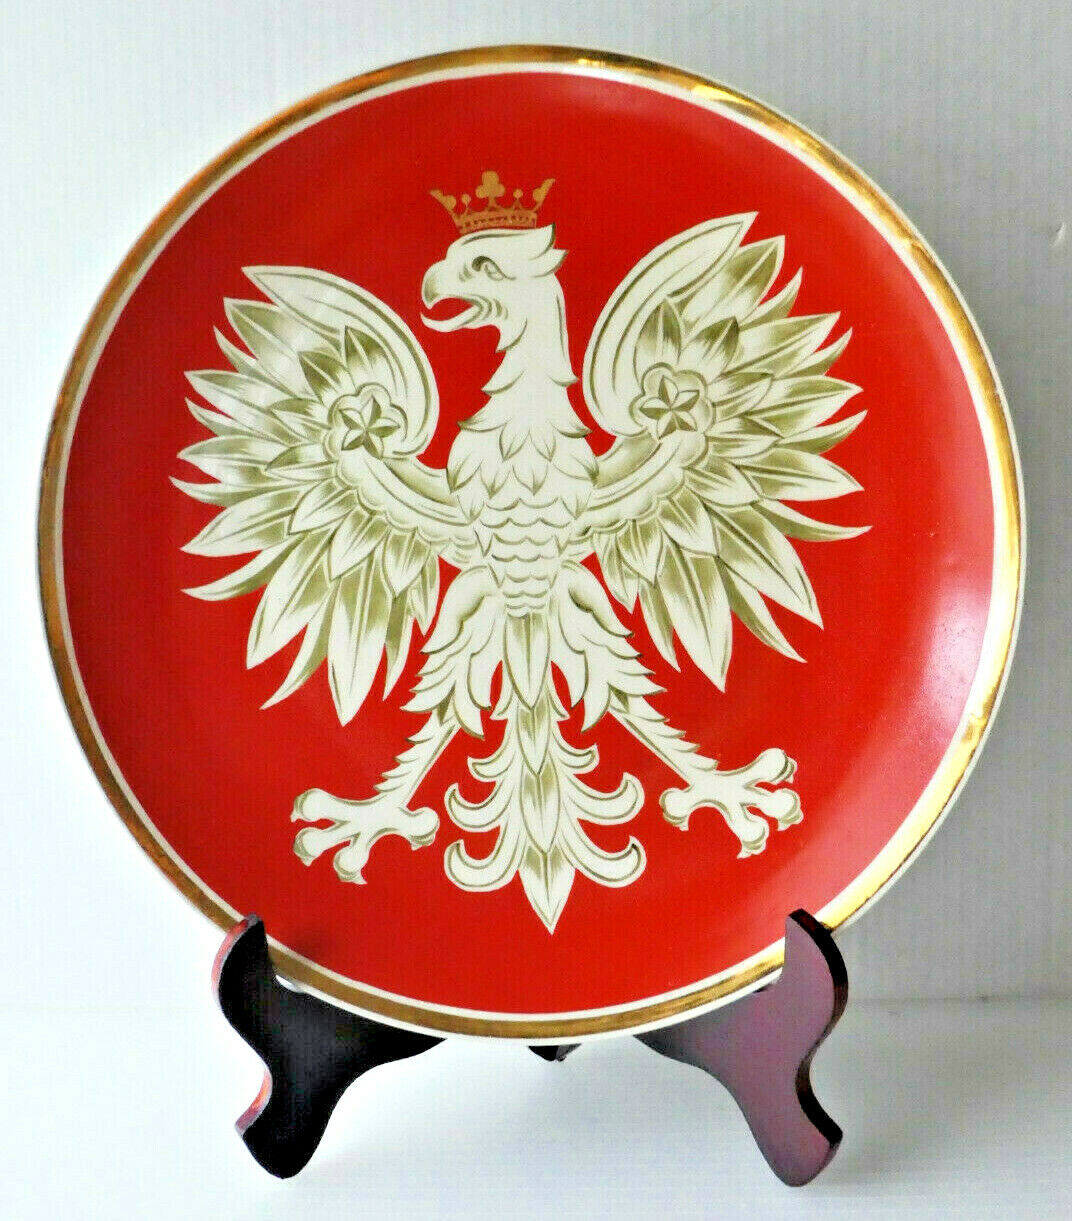 Vintage Large Cabinet Plate TULOWICE Plate MADE IN POLAND with GOLD CROWN EAGLE 